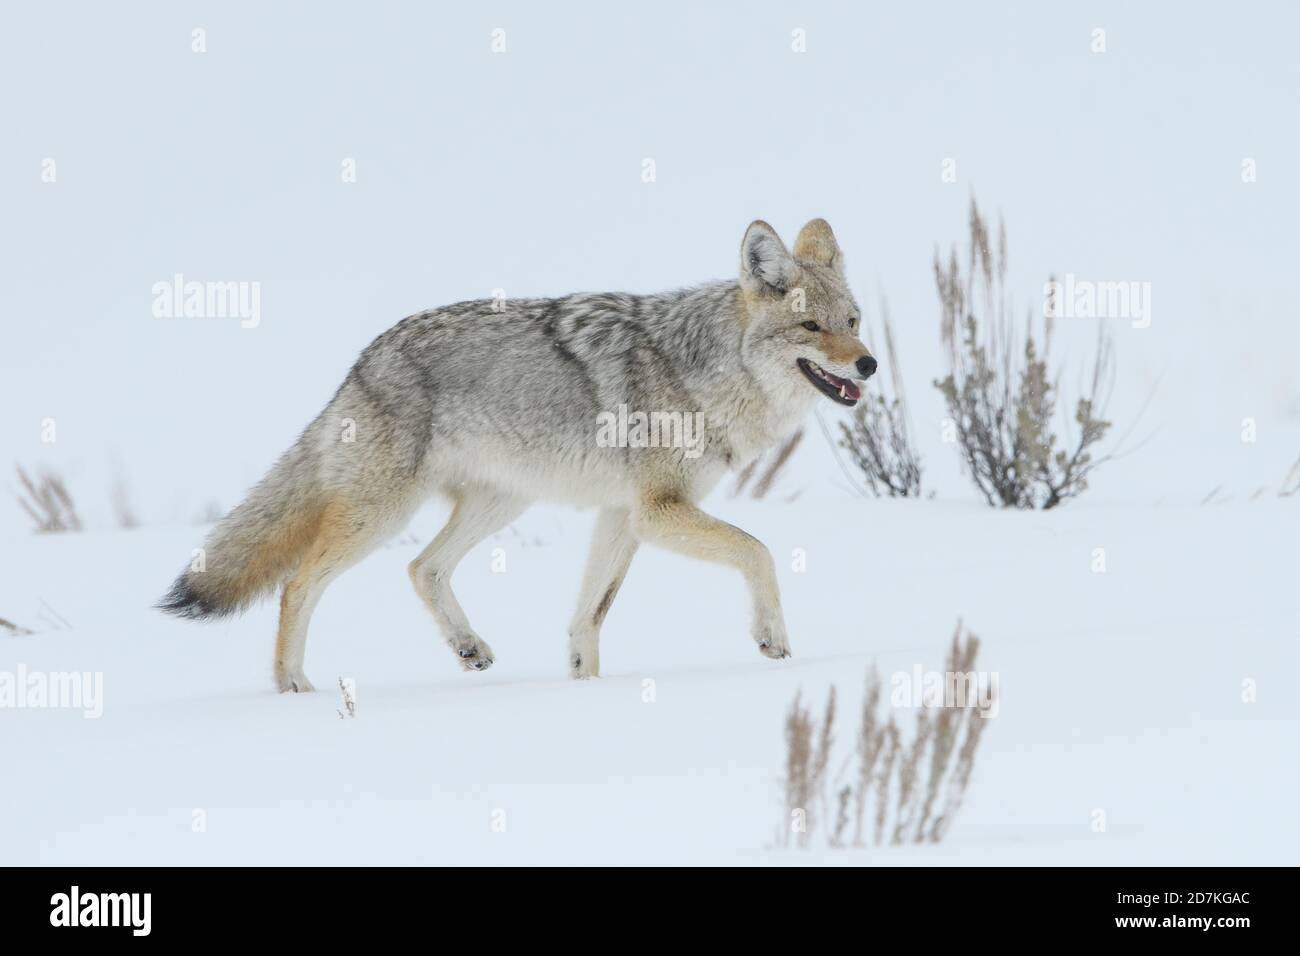 Coyote (Canis latrans), in snow, Yellowstone National Park, Wyoming Stock Photo